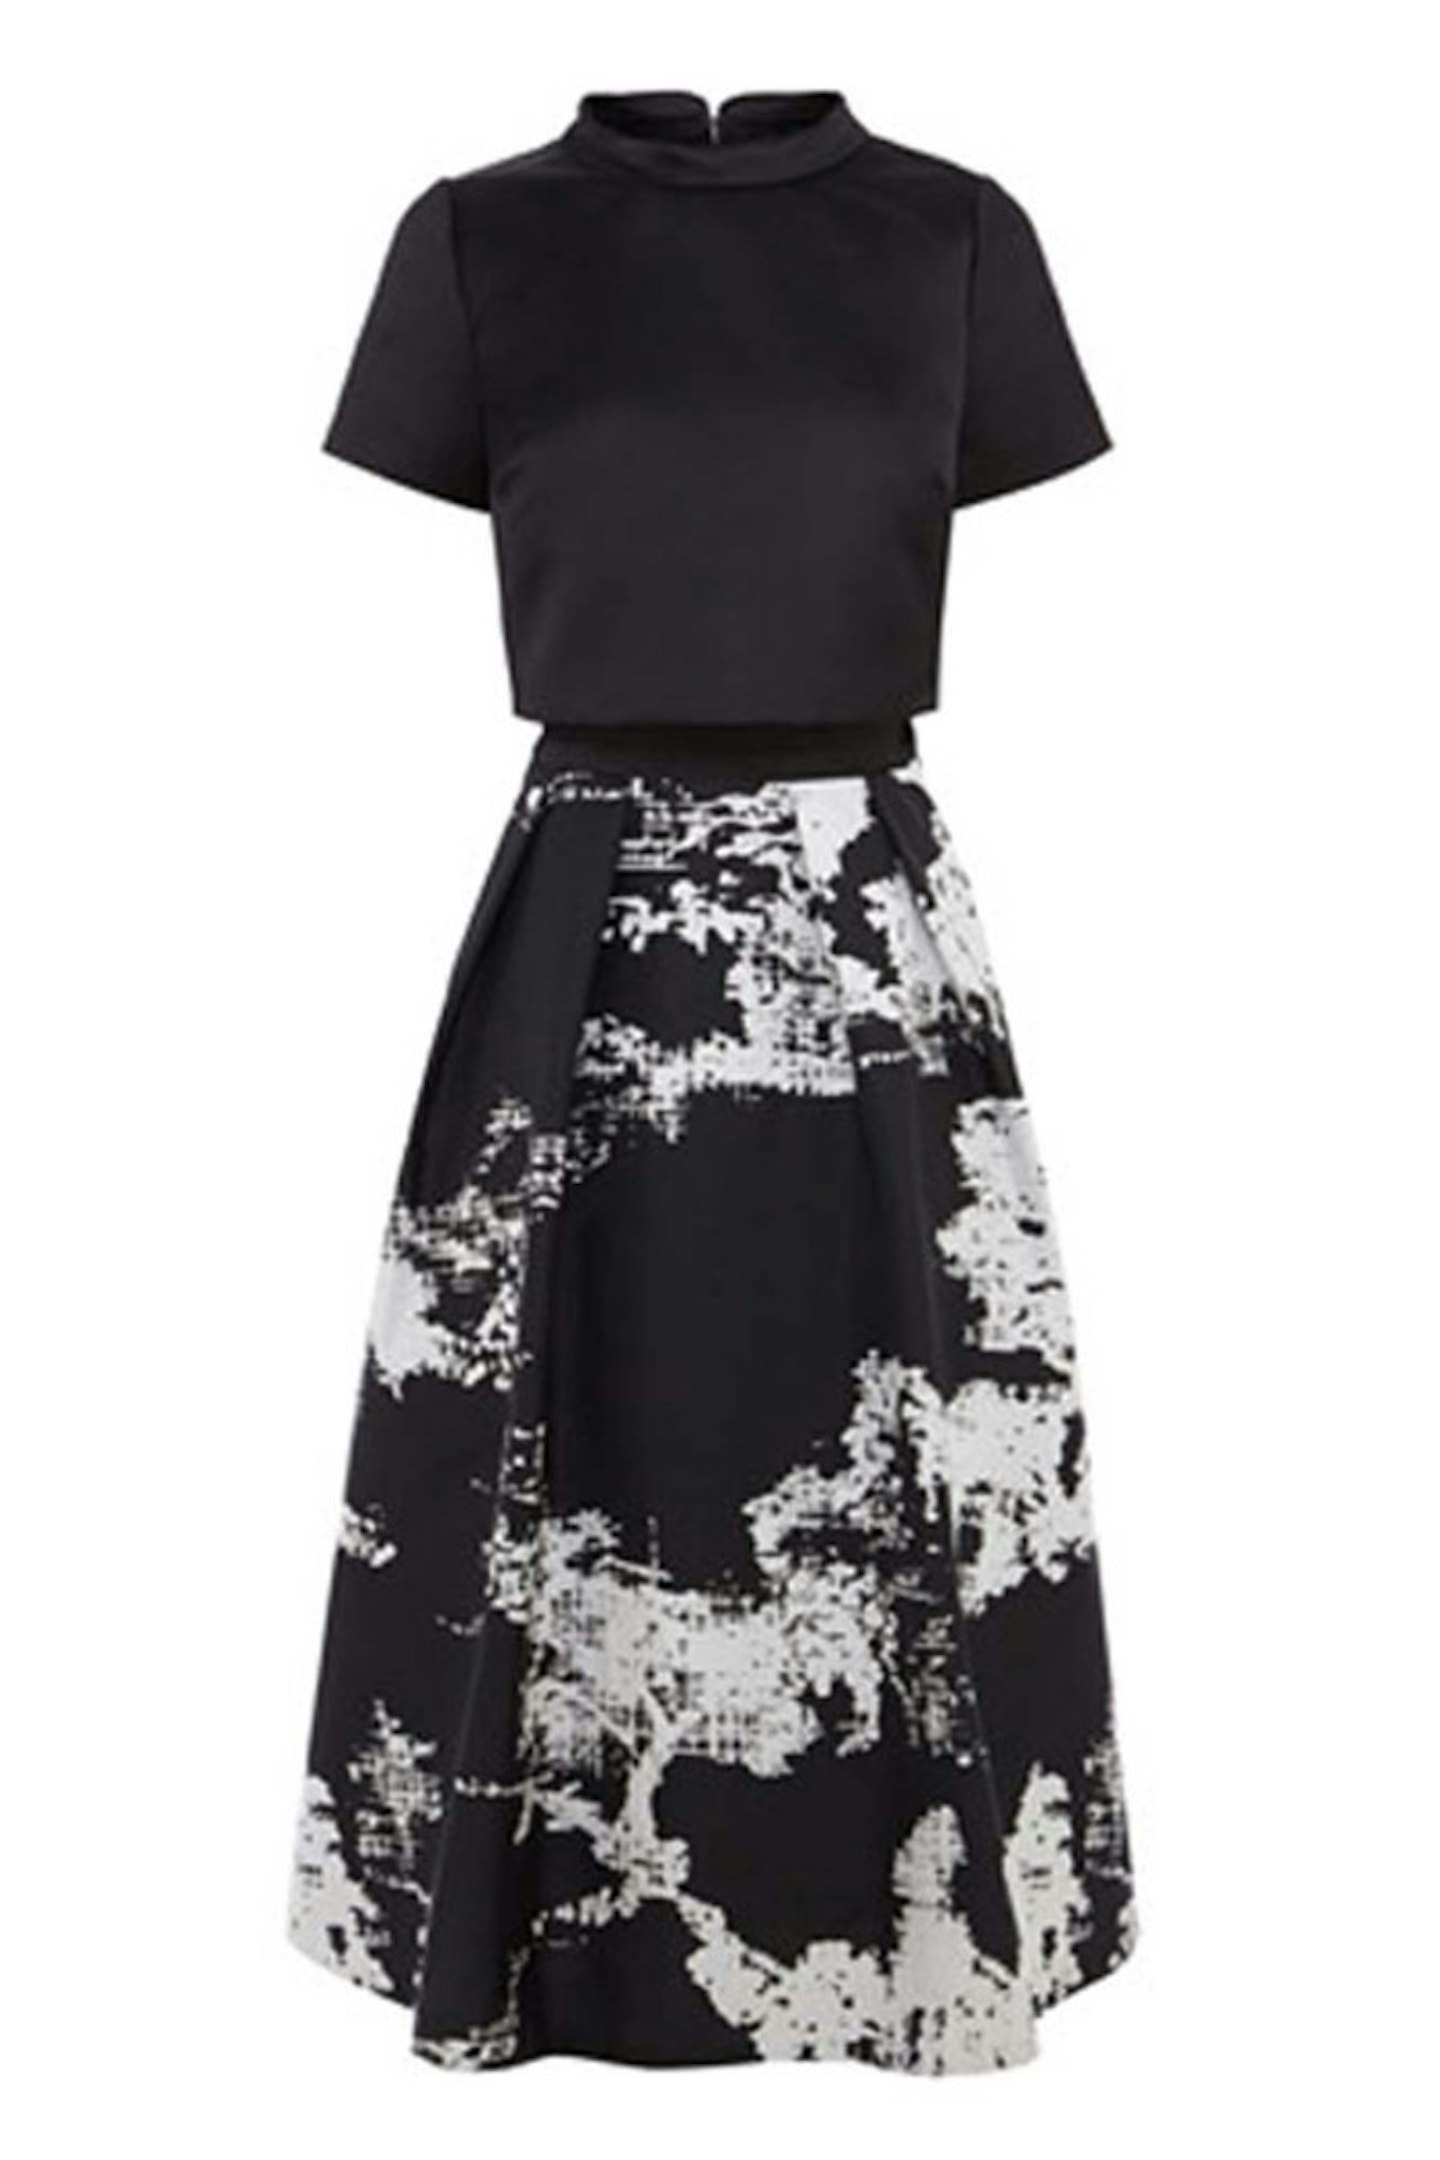 Monochromed printed dress with A-line skirt and black crop top overlay, £195, Coast